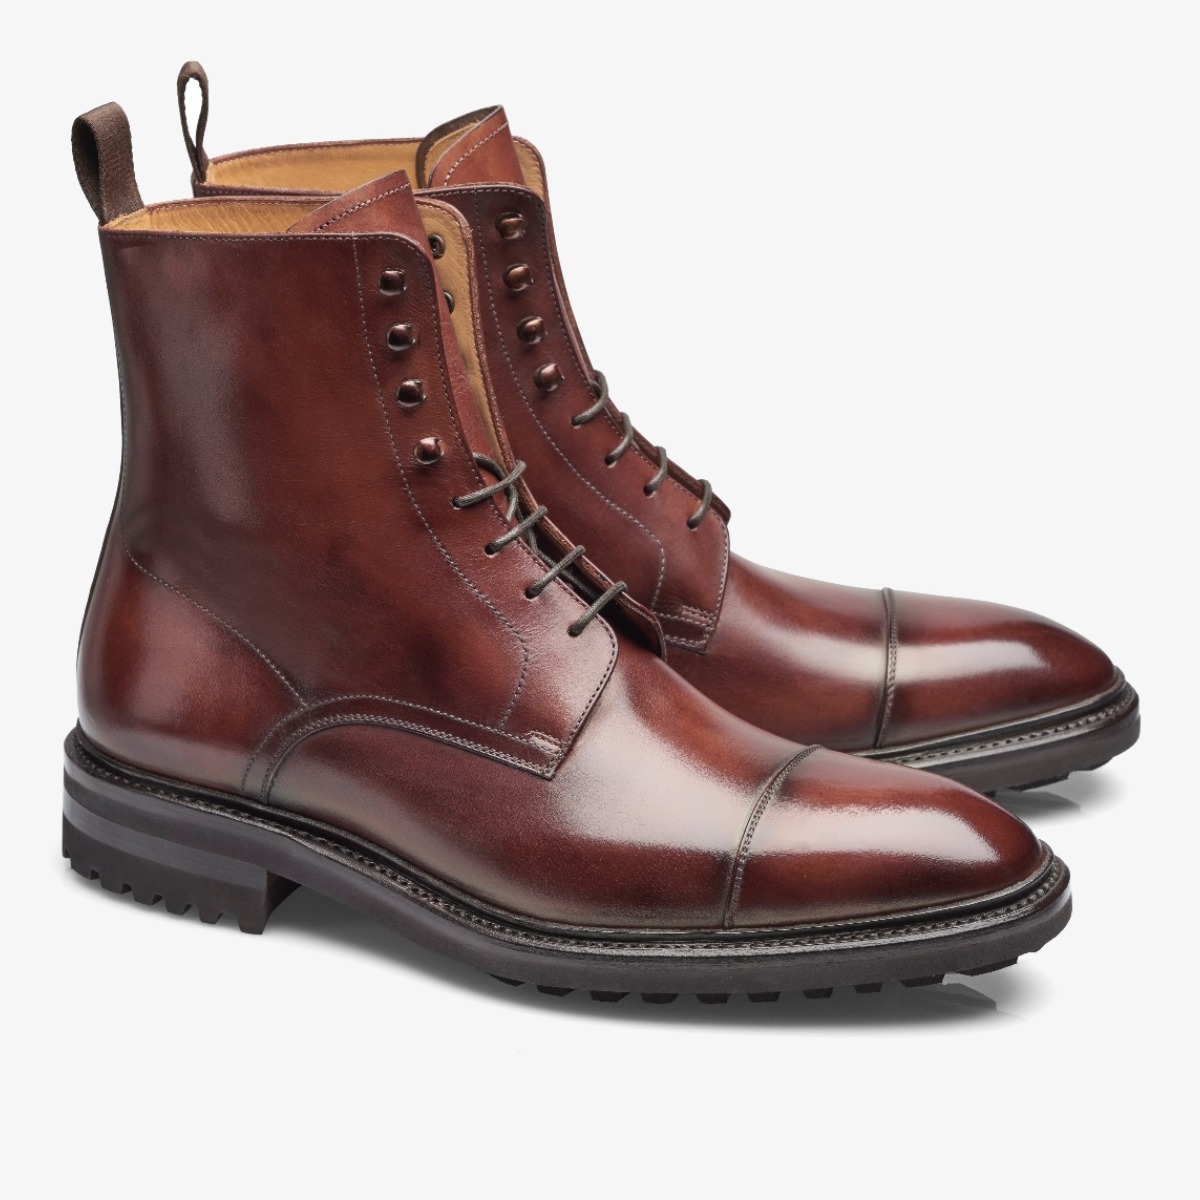 Carlos Santos 8866 Stallone burgundy shadow lace-up boots